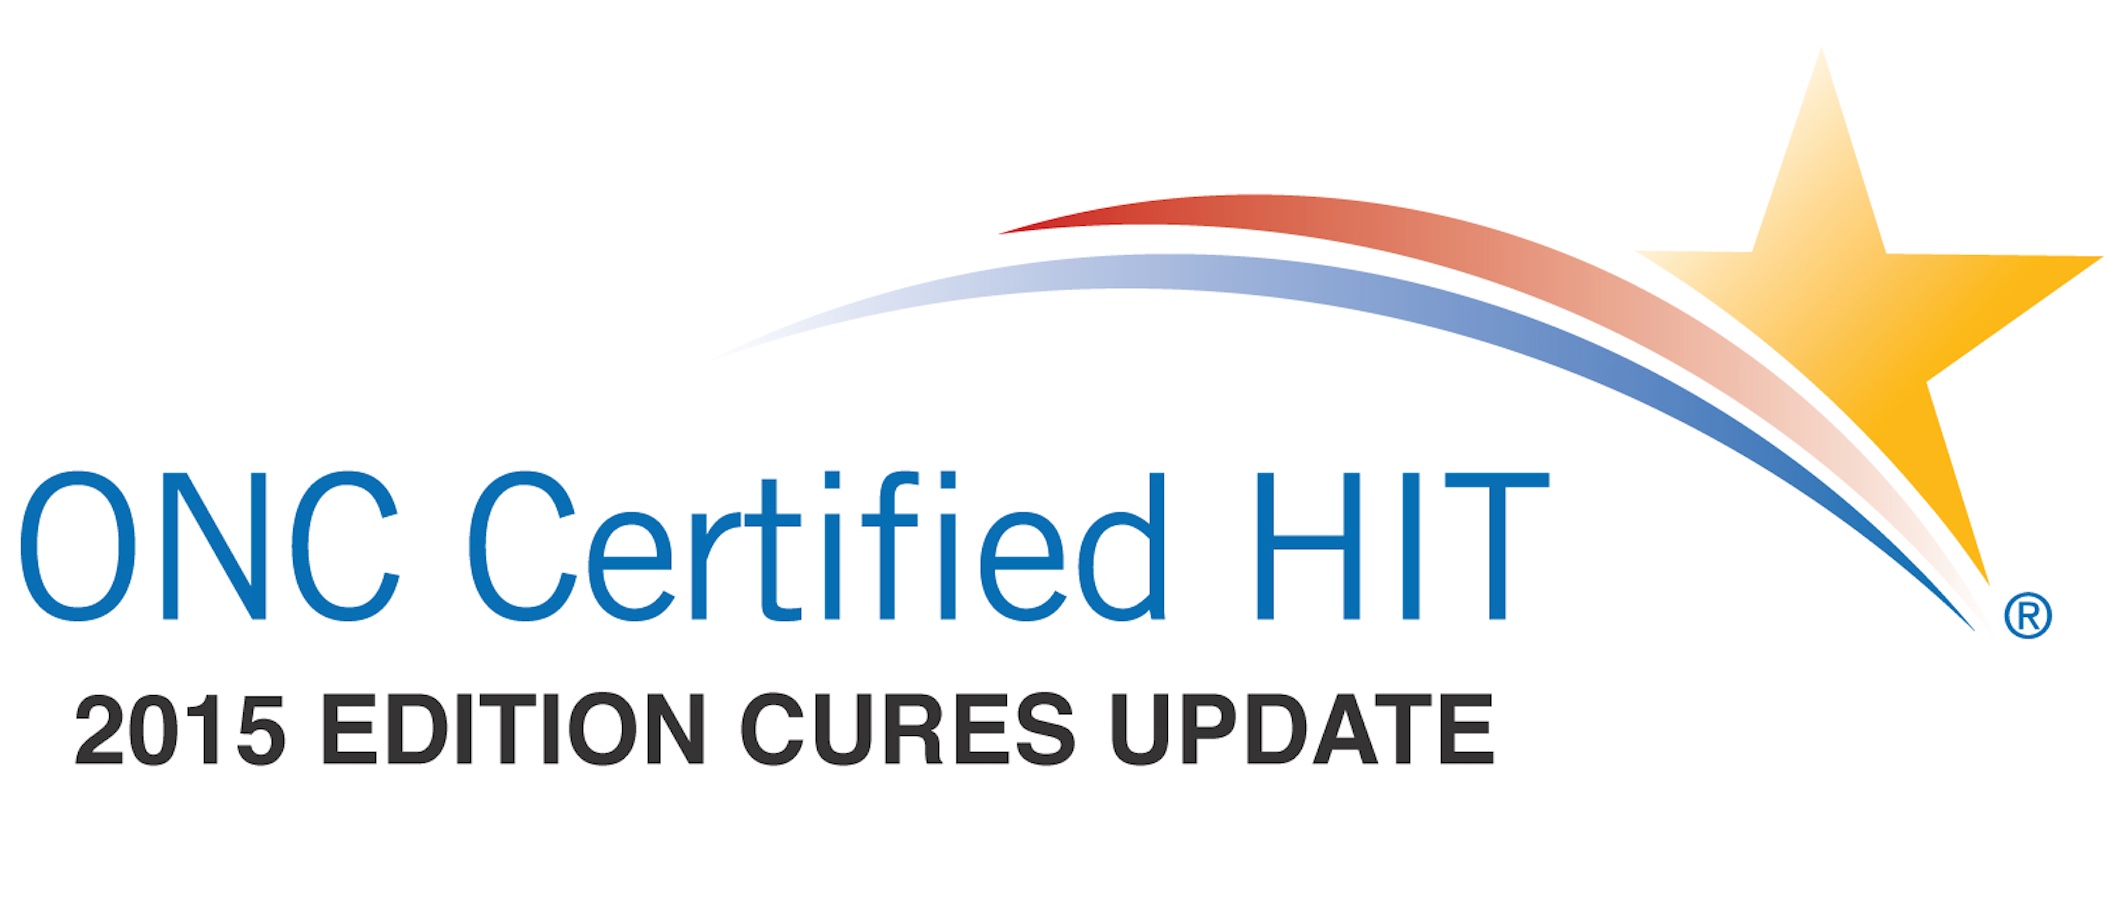 ONC certified HIT 2015 edition Cures Update